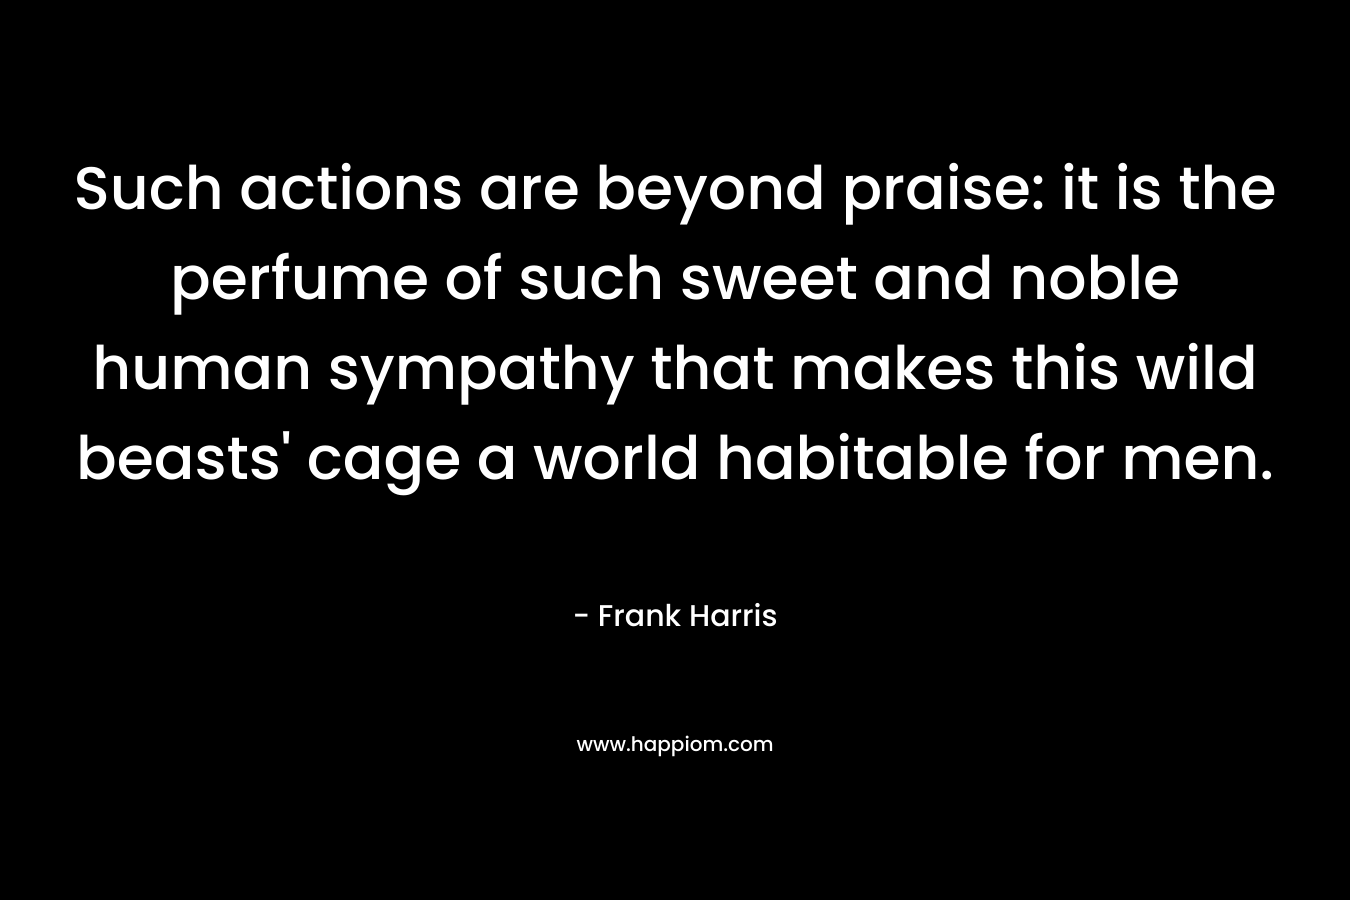 Such actions are beyond praise: it is the perfume of such sweet and noble human sympathy that makes this wild beasts’ cage a world habitable for men. – Frank Harris